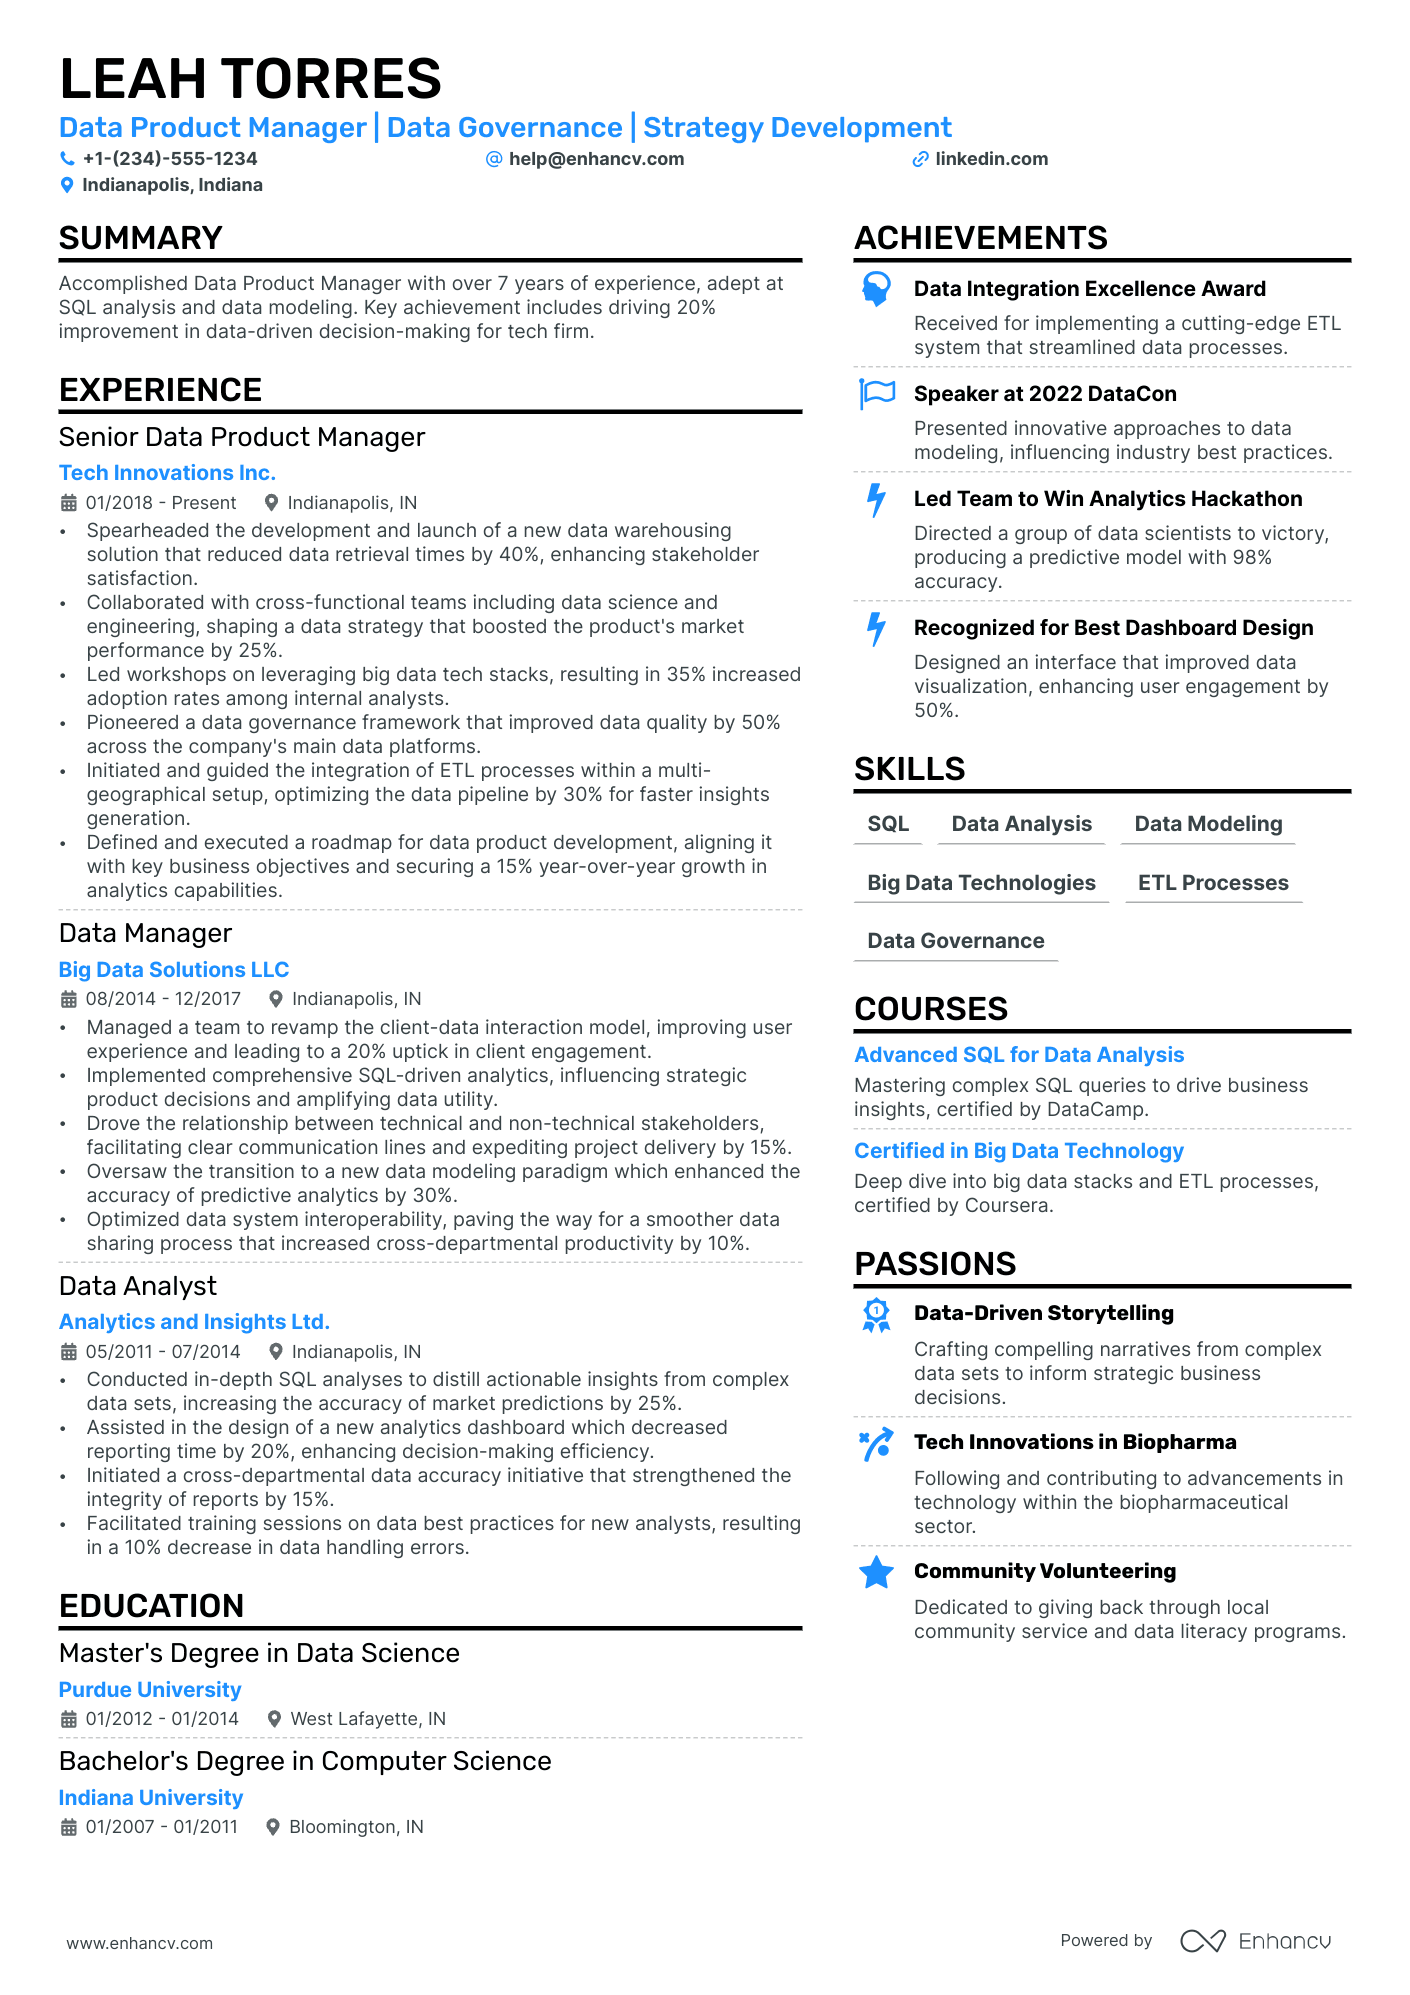 Data Product Manager resume example